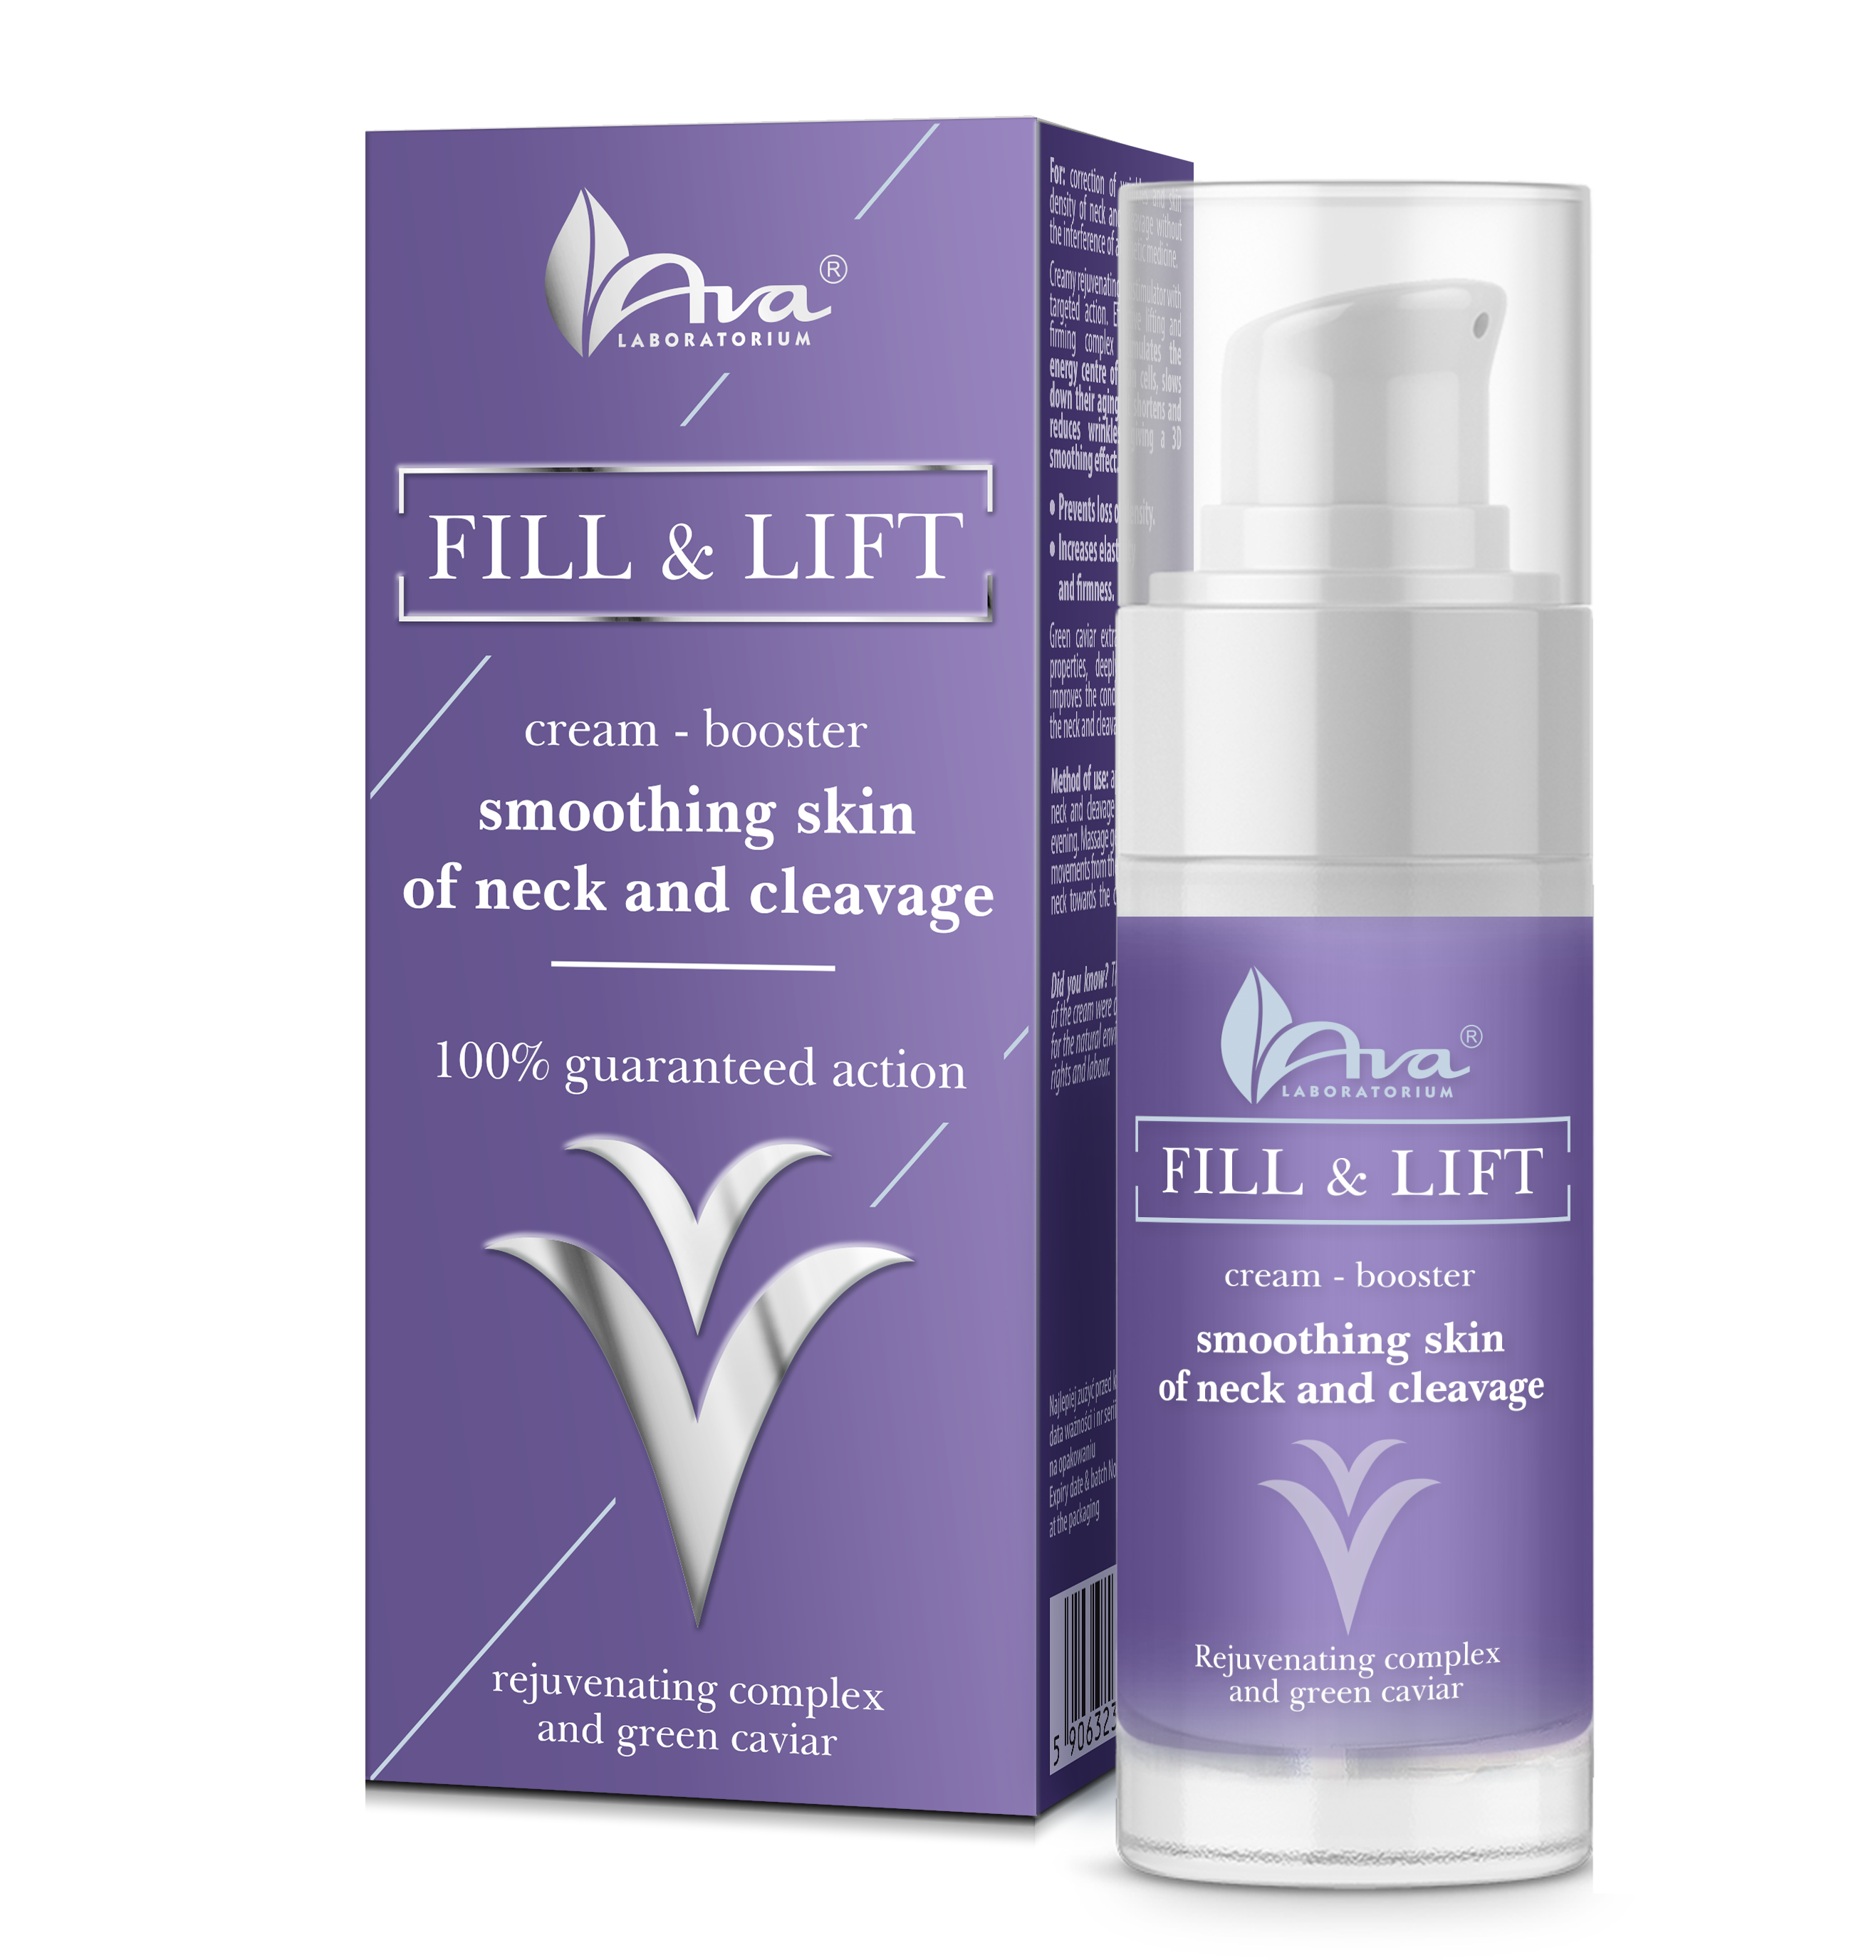 8929_FILL&LIFT_cream_booster_smoothing_skin_of_neck_and_cleavage_SET_ENG